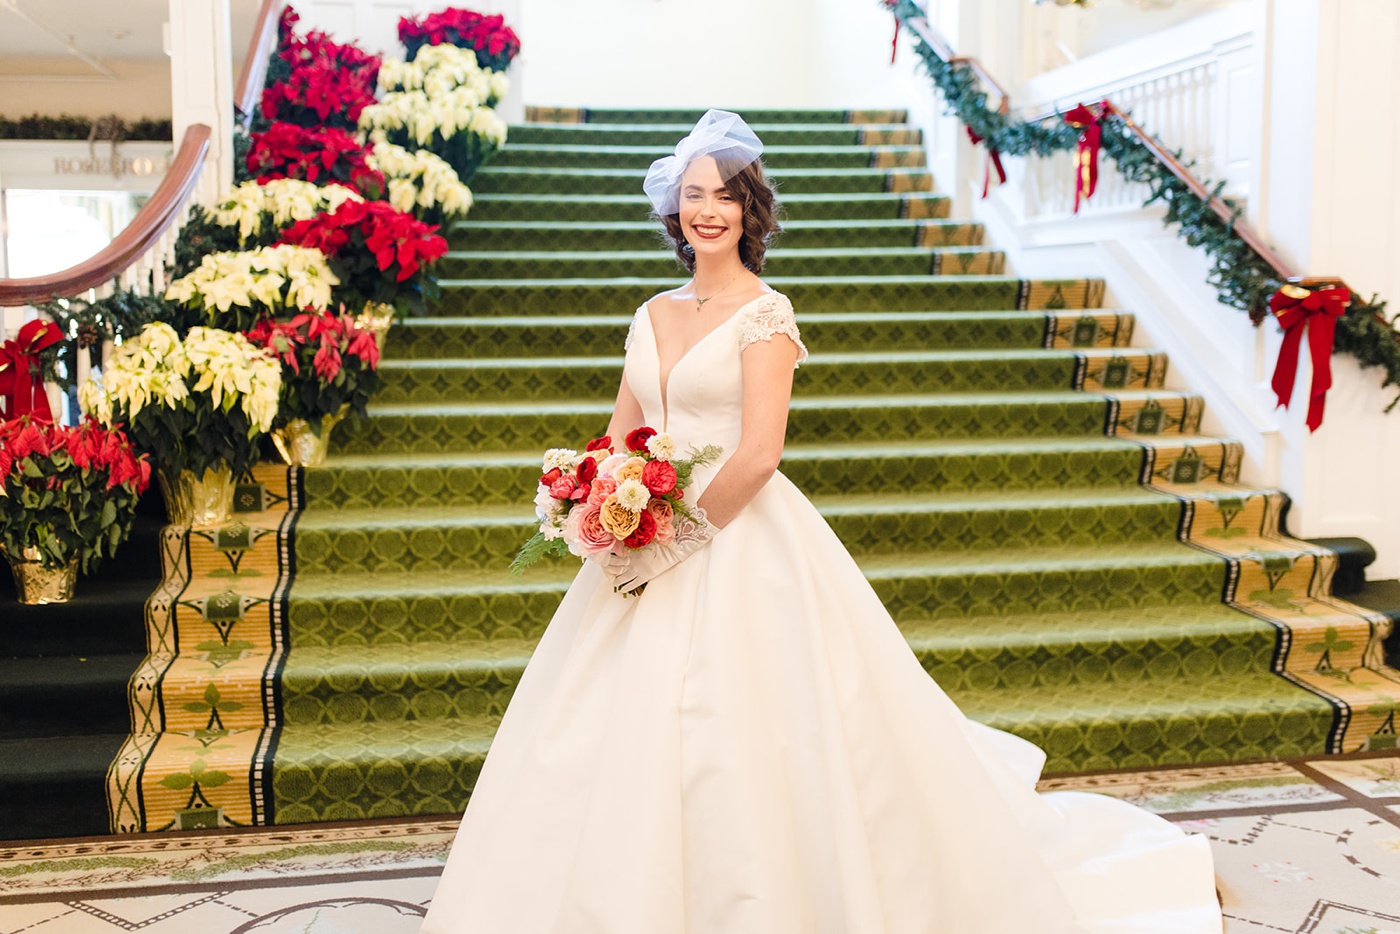 Bride in a satin ballgown and a birdcage veil with a red lip